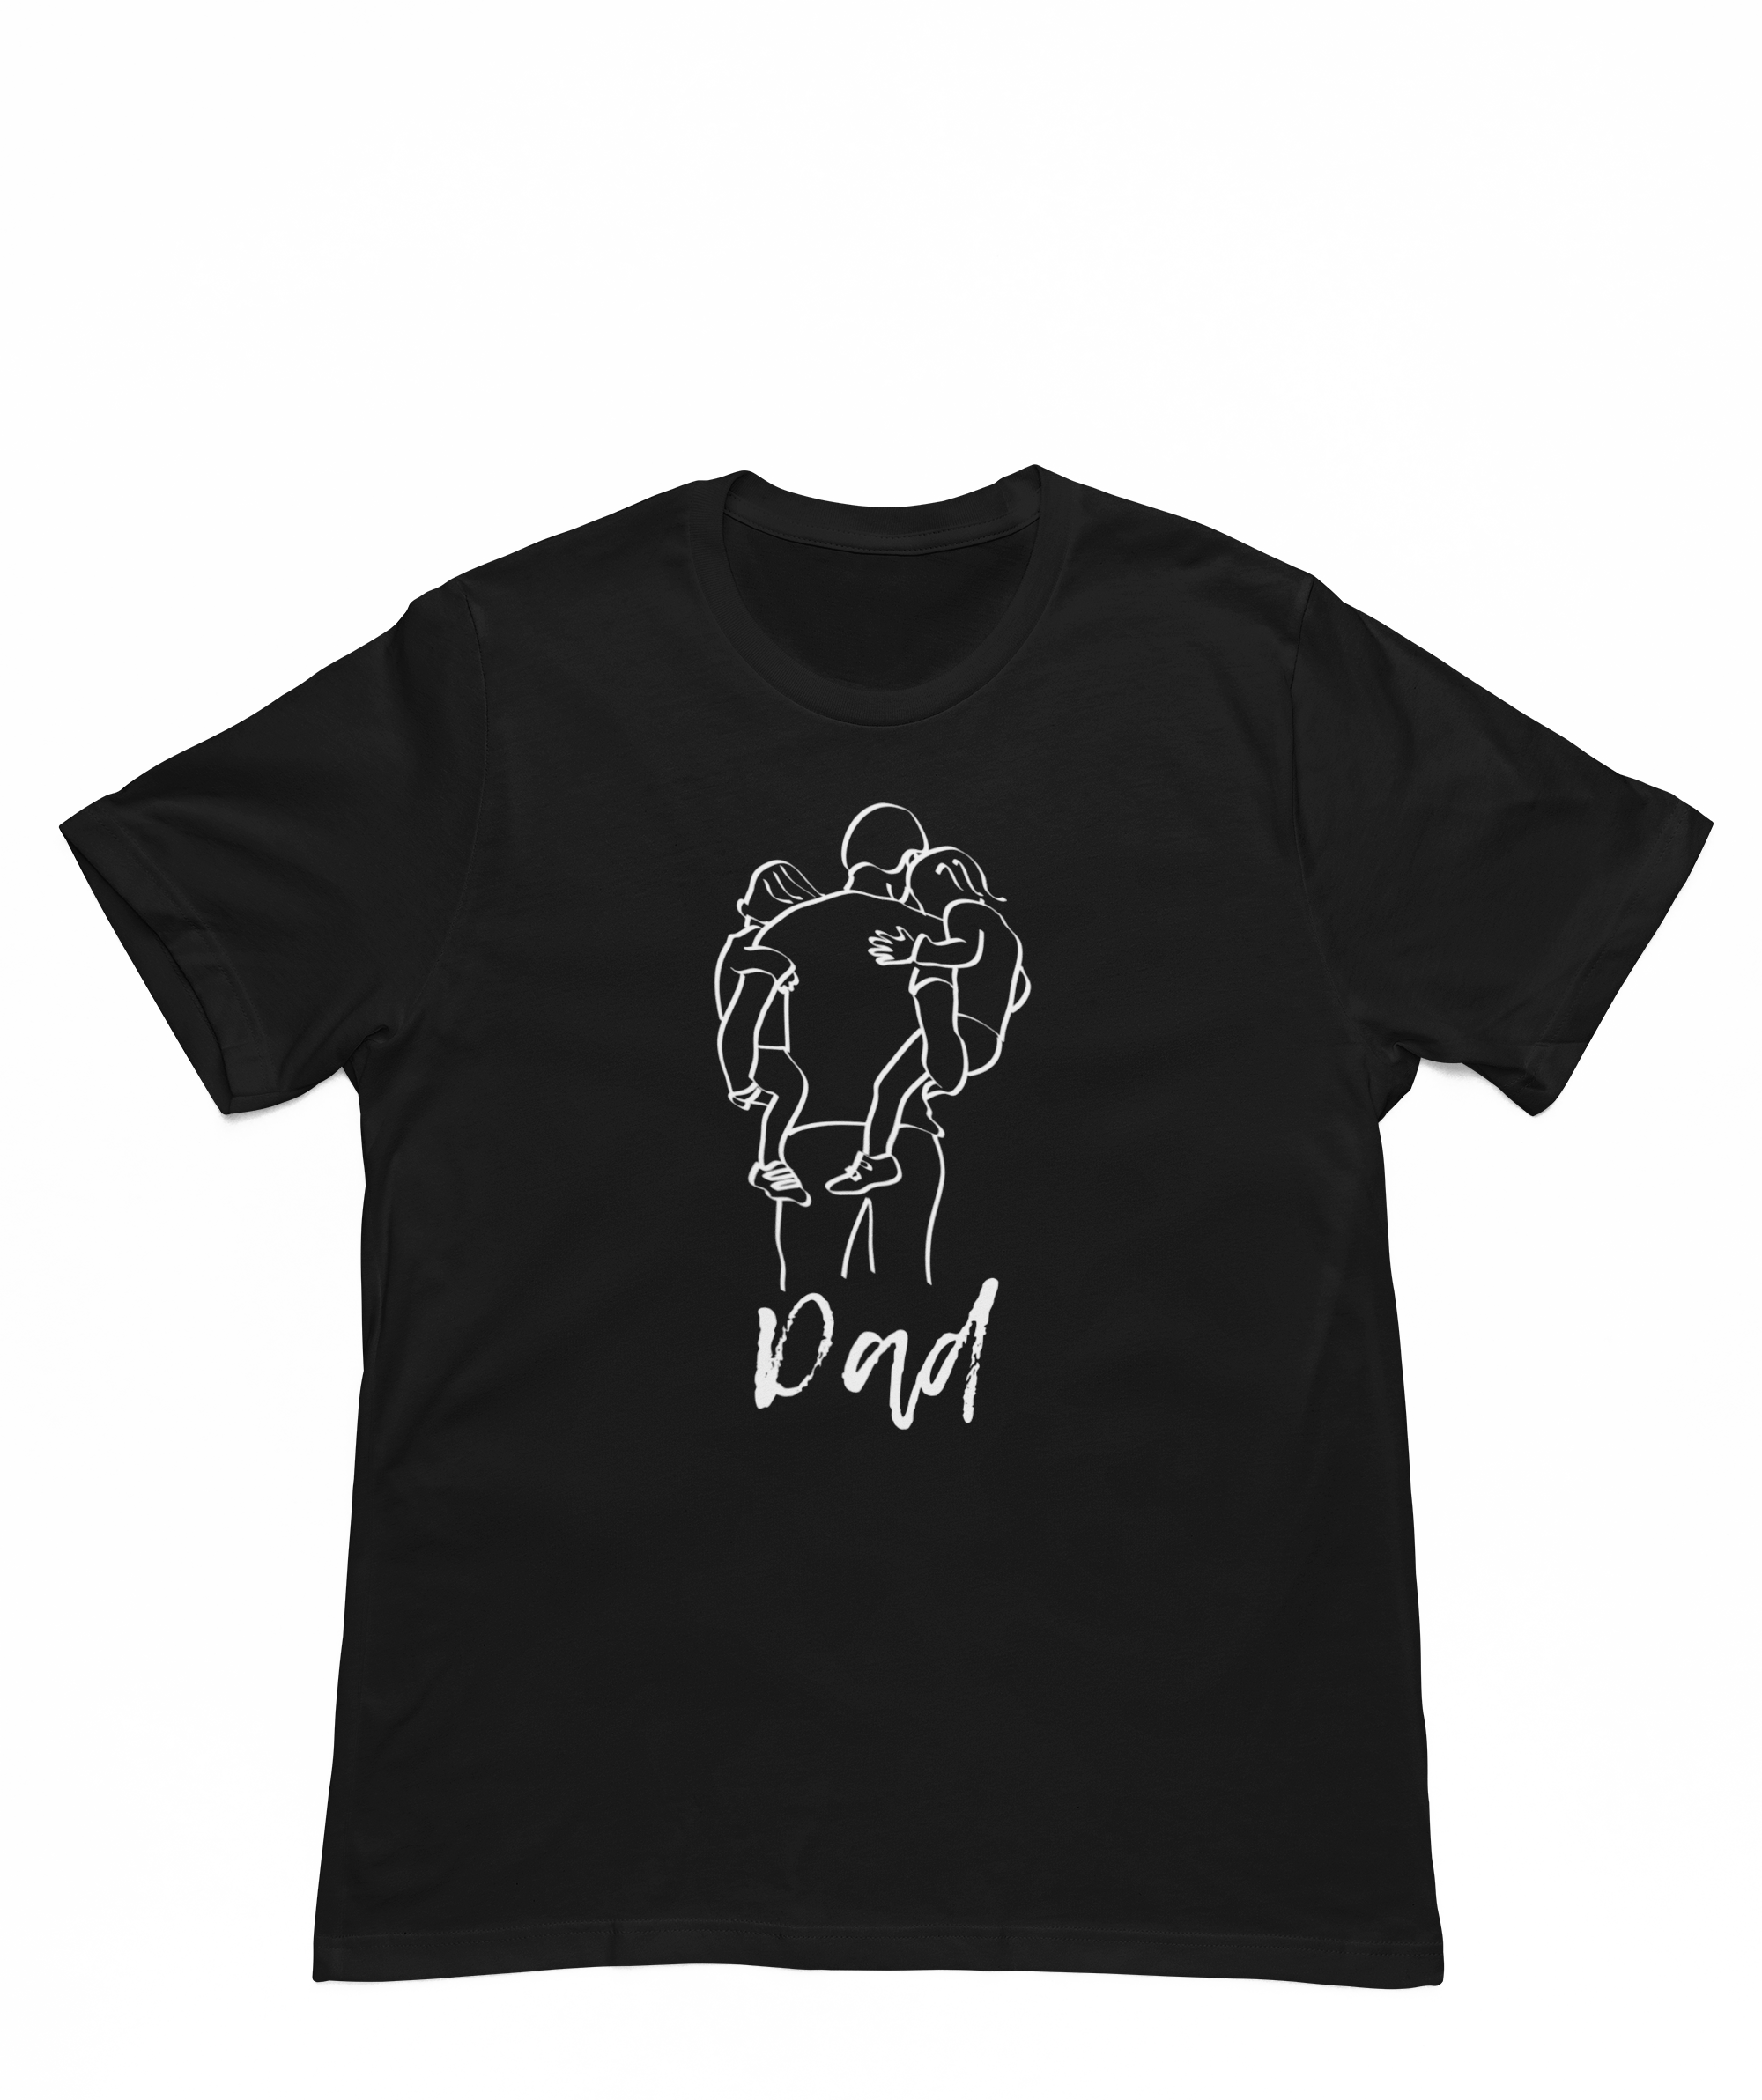 Father figure t-shirt - Father's Day gift